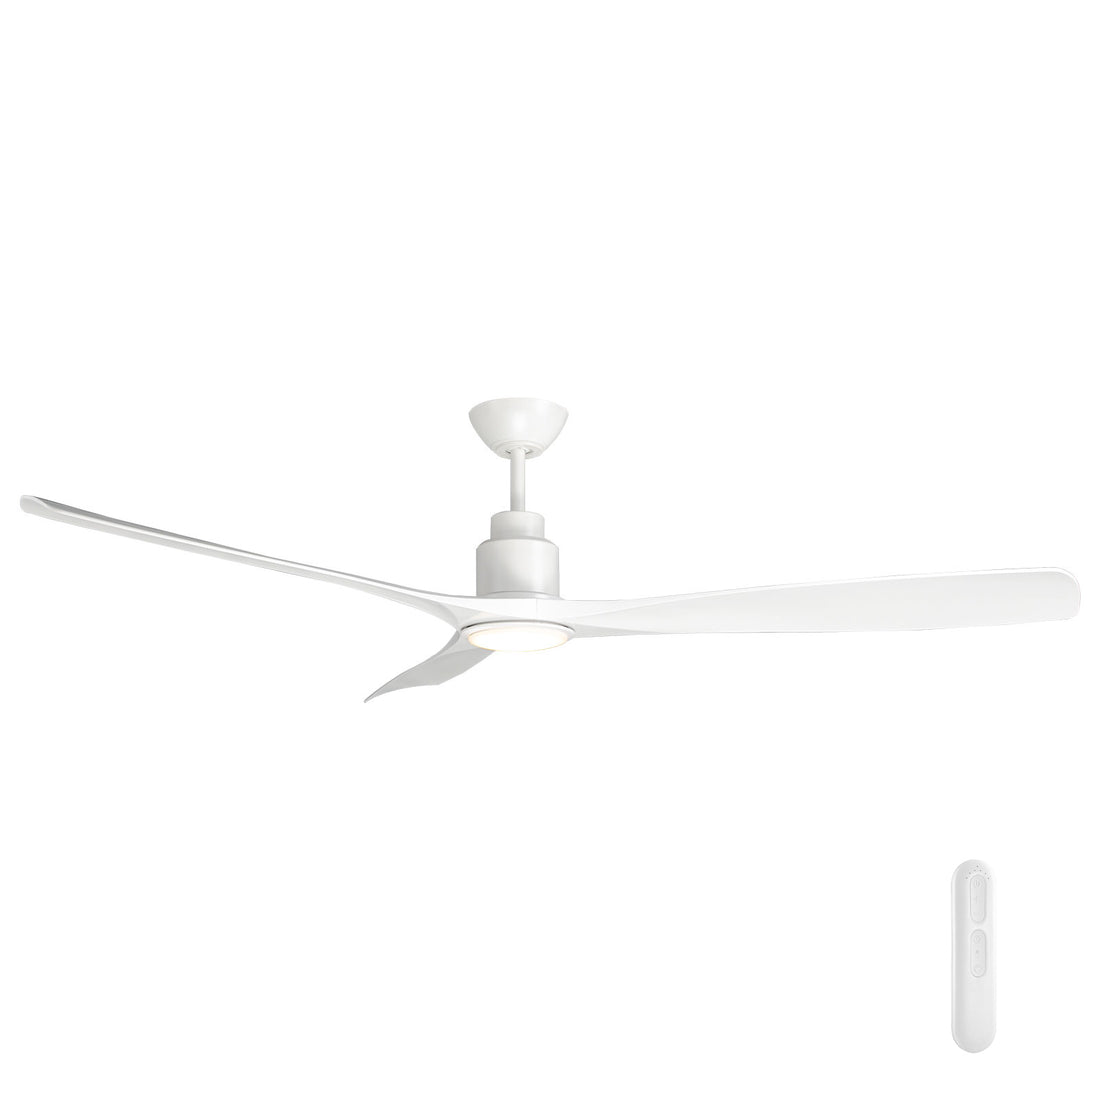 Iceman 152cm DC Ceiling Fan with Remote and LED Light